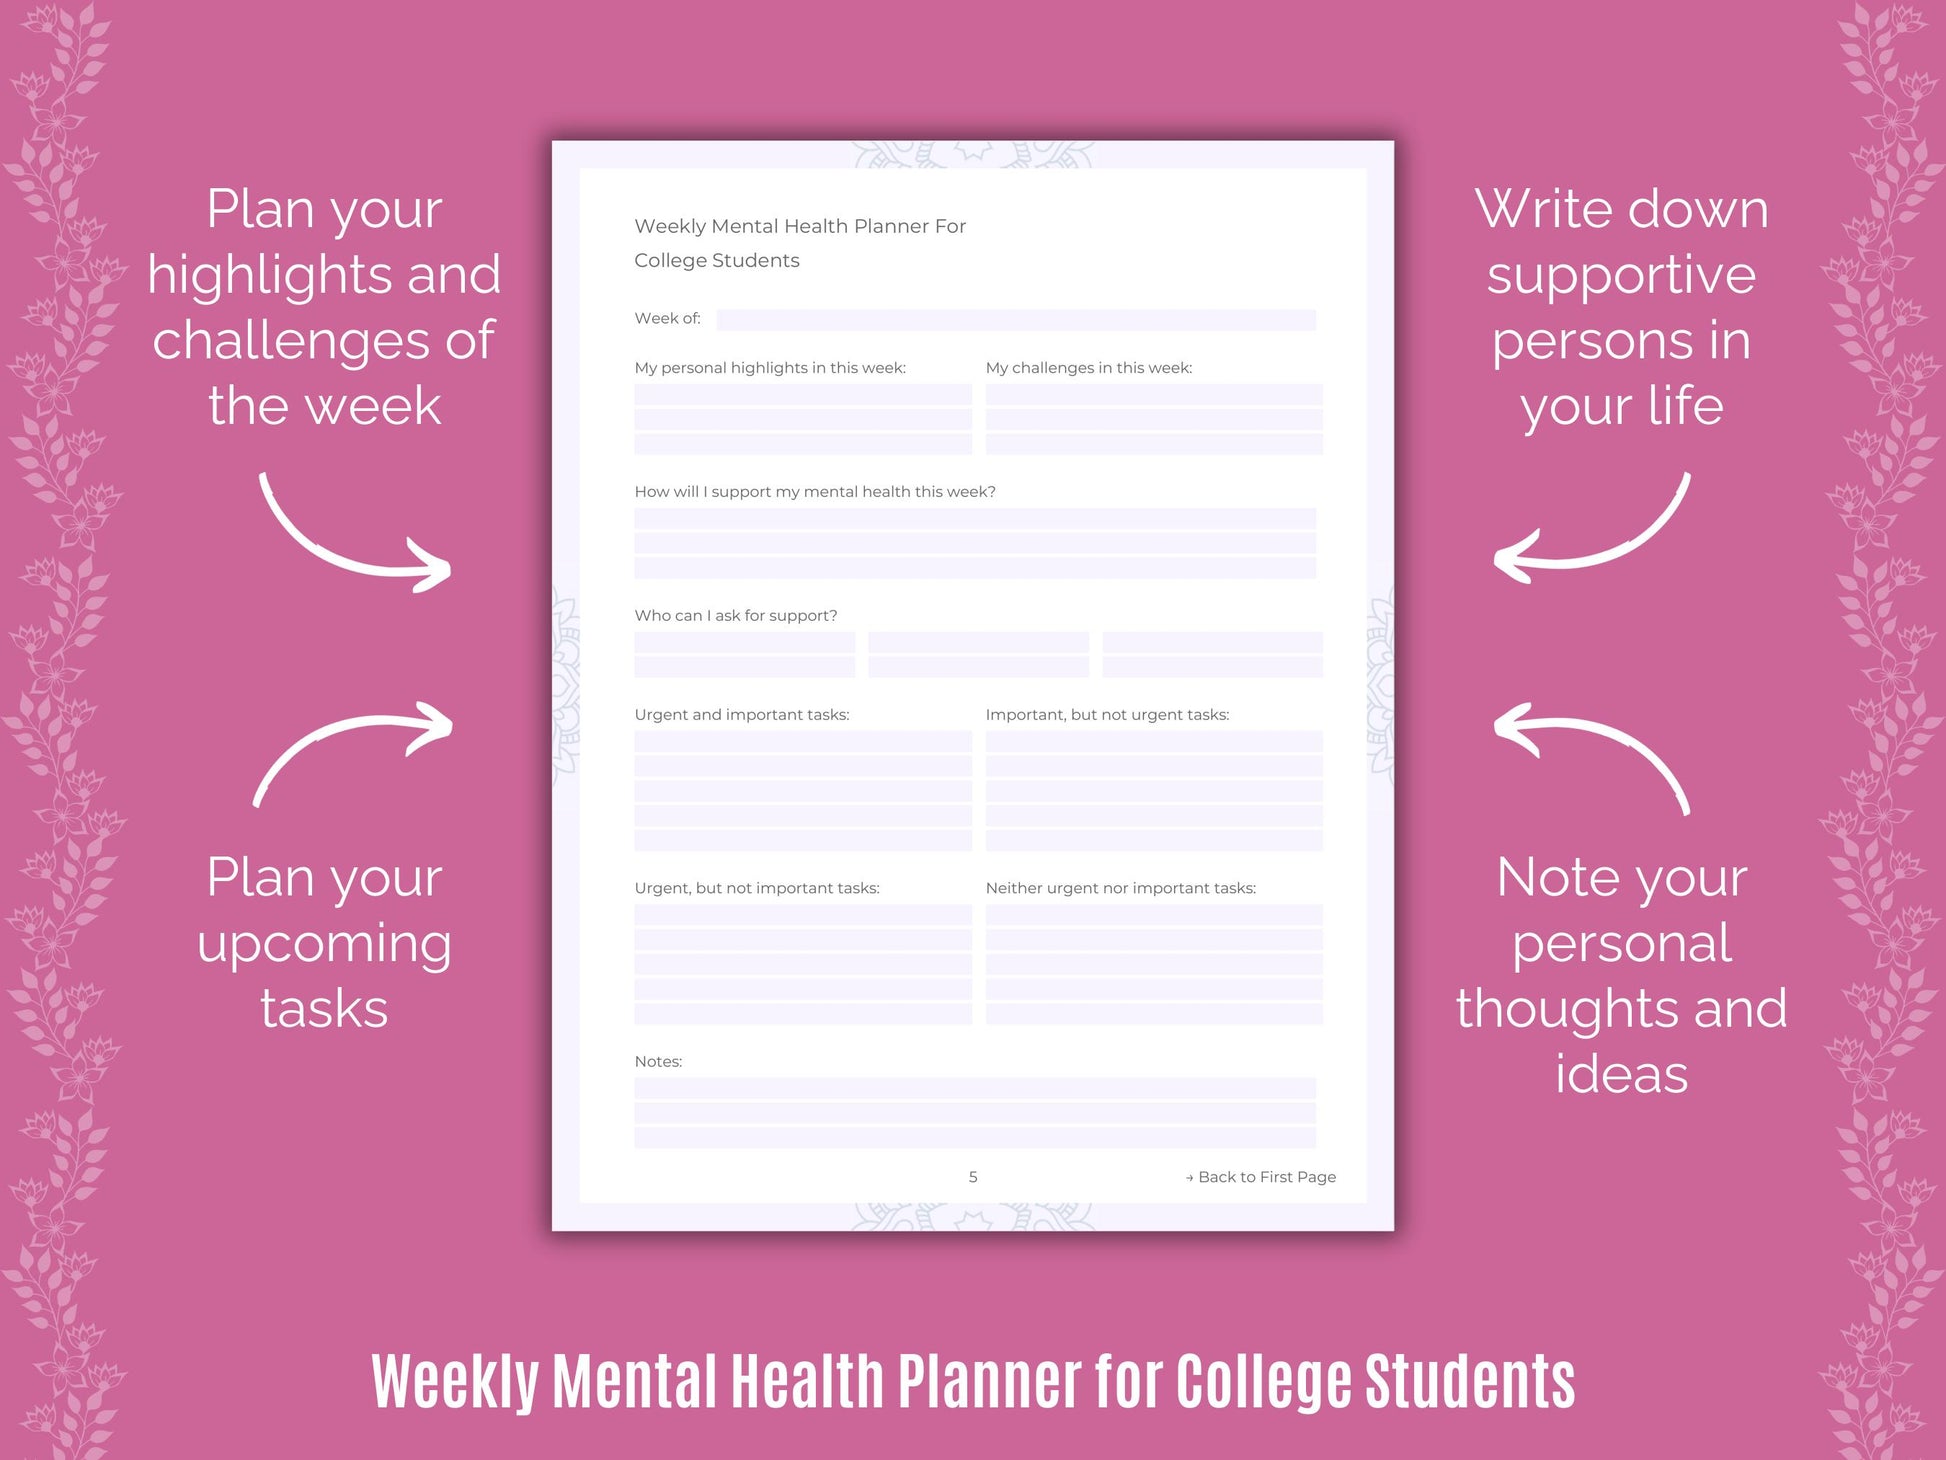 College Goal Setting, College Cheat Sheet, College Workbooks, College Journaling, Student, College Notes, College Templates, College Mental Health, College Therapy, College Resources, College Tools, College Journals, College Counseling, College Planners